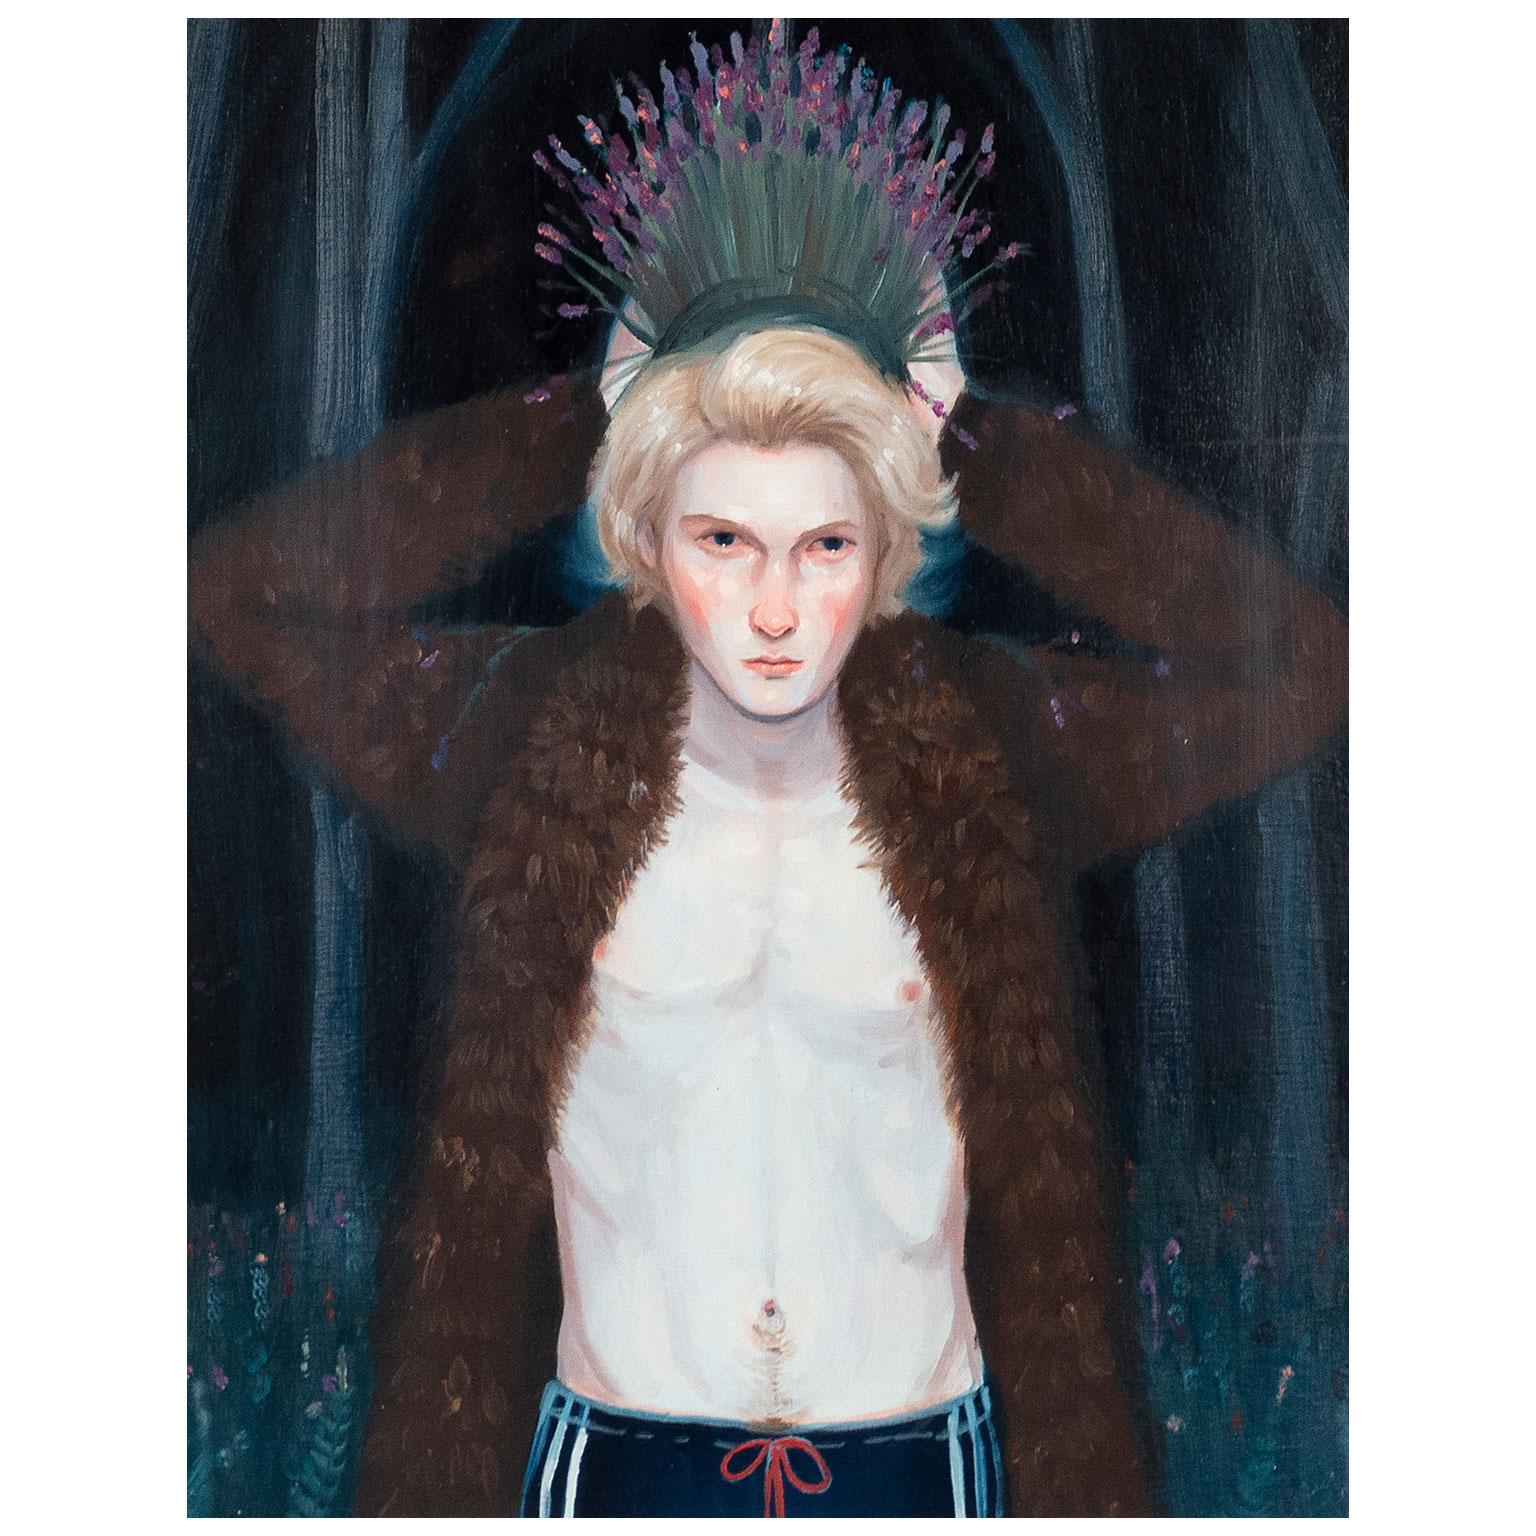 Dauphin - Painting by Kris Knight